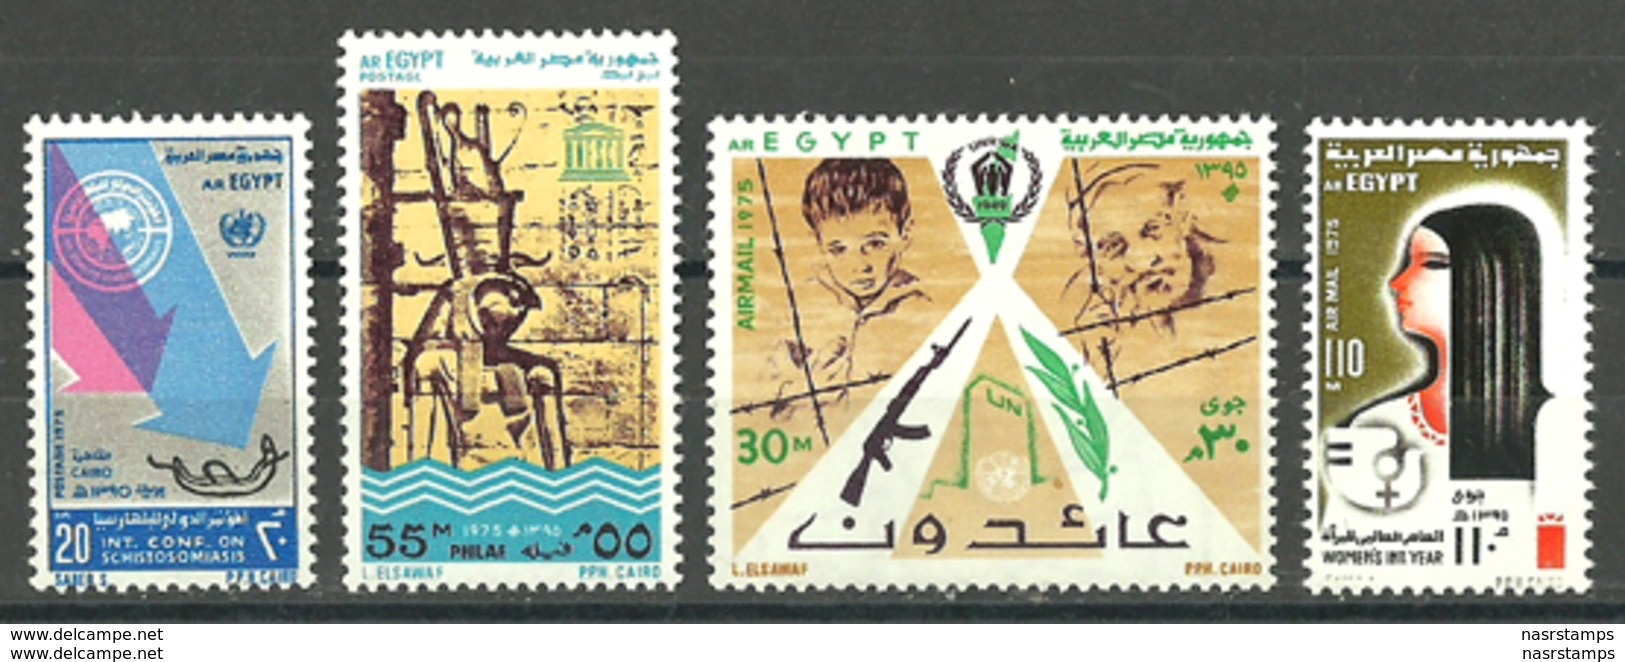 Egypt - 1975 - UN - UNESCO - ( United Nation Day - Temple Of Philae - Refugees - Schistosomiasis Conf. ) - MNH (**) - Egyptology